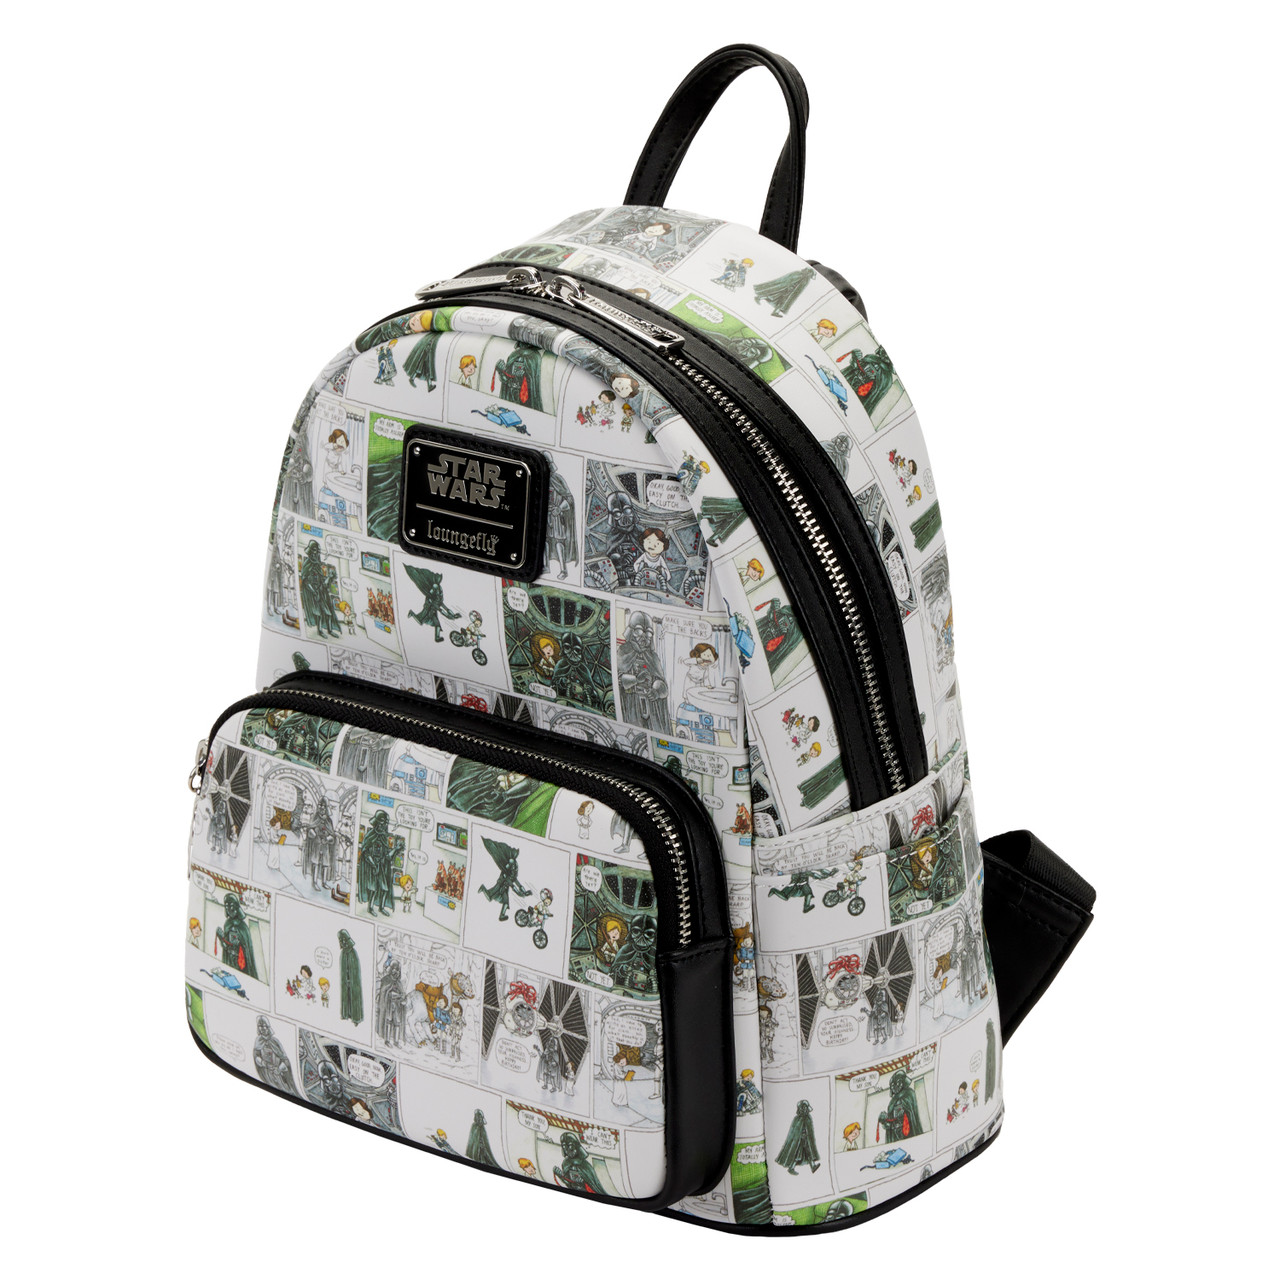 Loungefly Disney Chip and Dale Snackies All-Over-Print Mini Backpack